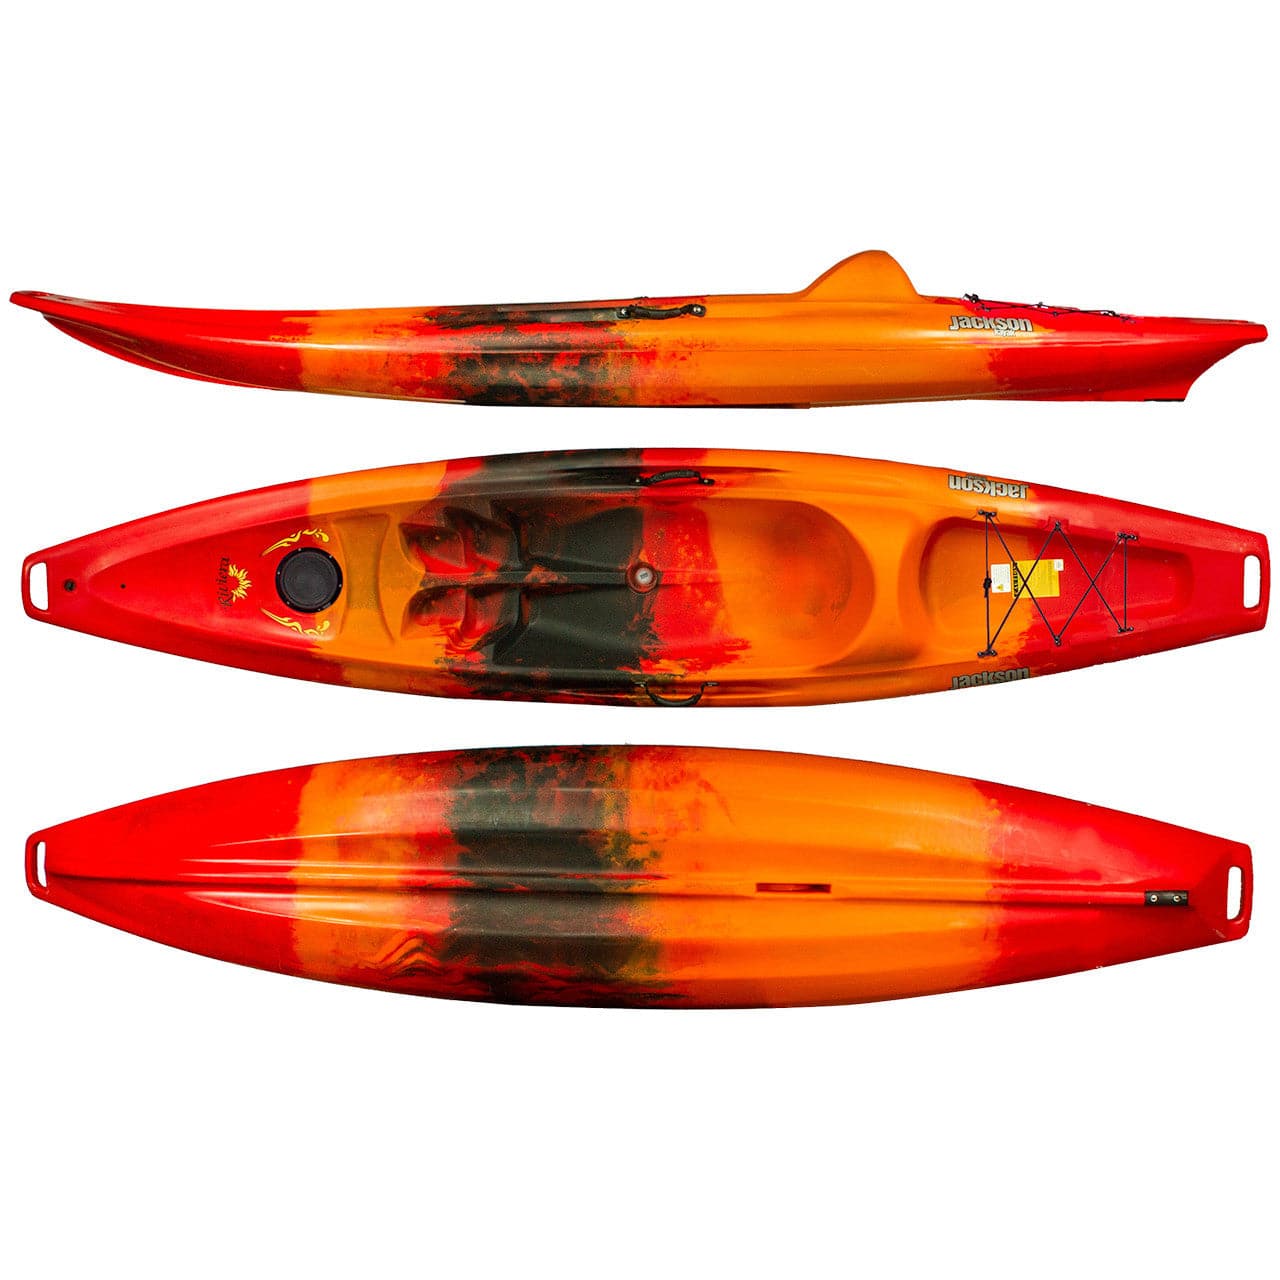 Featuring the Riviera sit-on-top rec / touring kayak manufactured by Jackson Kayak shown here from a fourth angle.